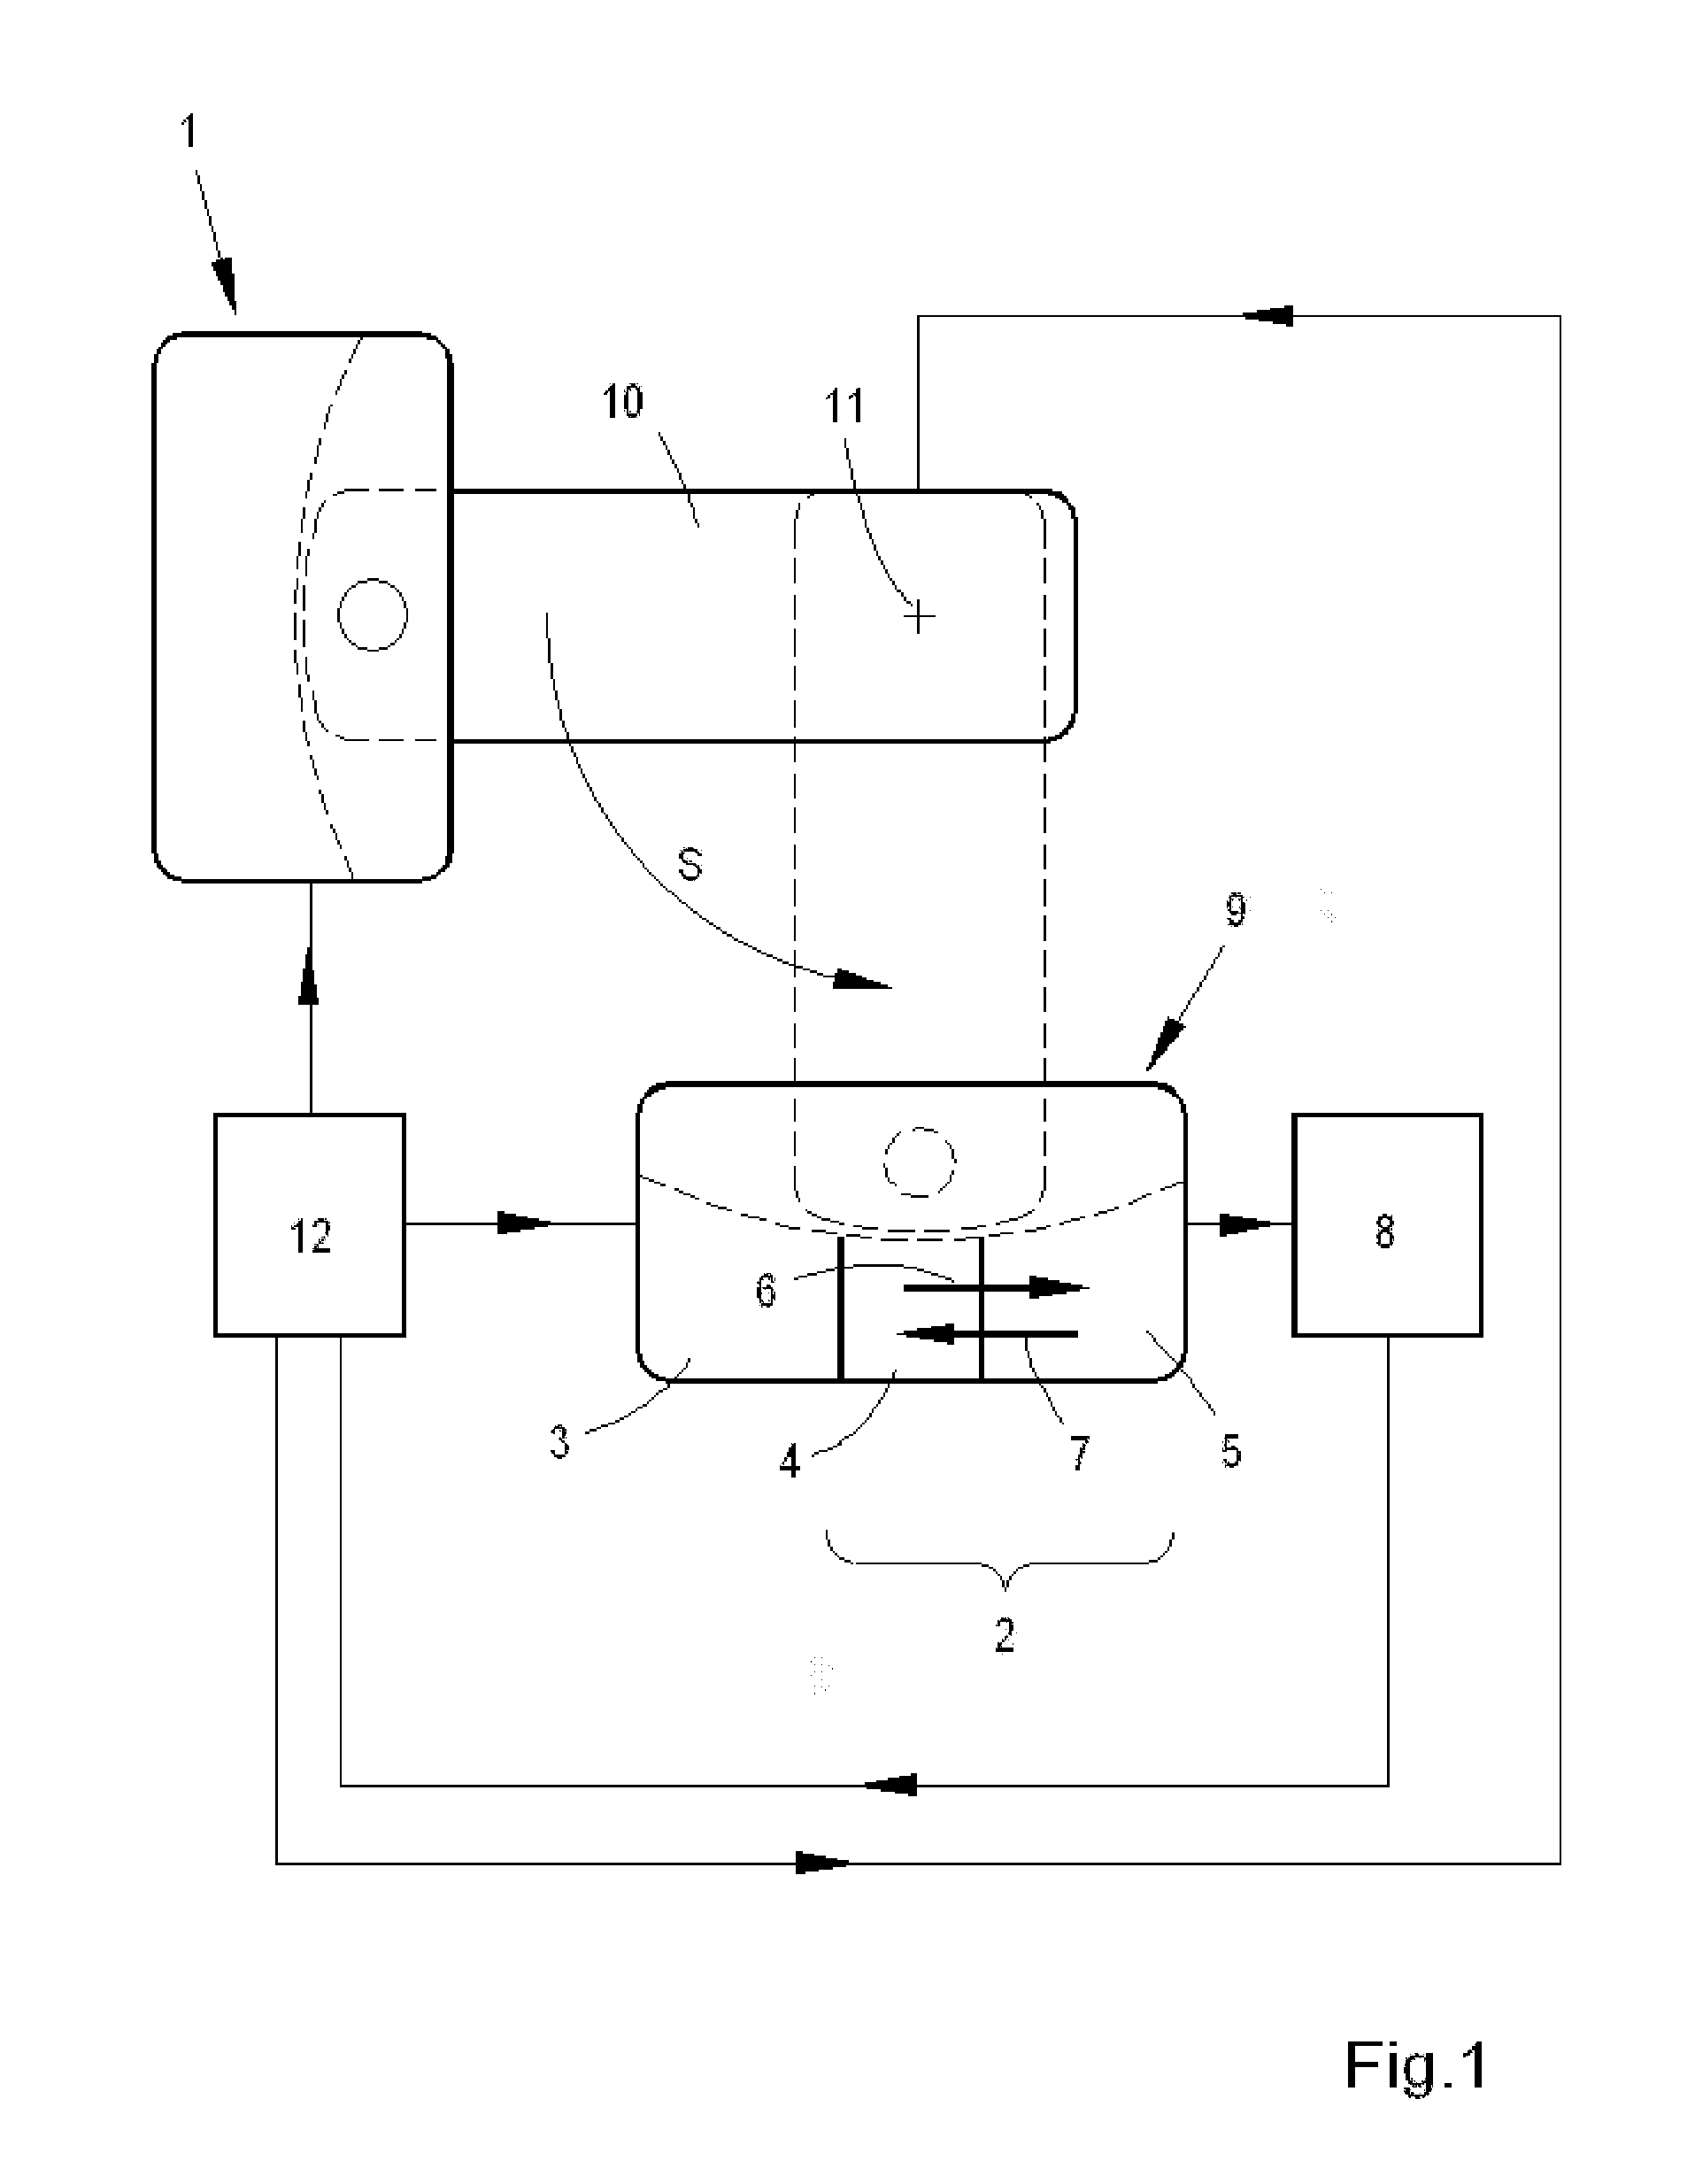 Instrument system and procedure for phacoemulsification